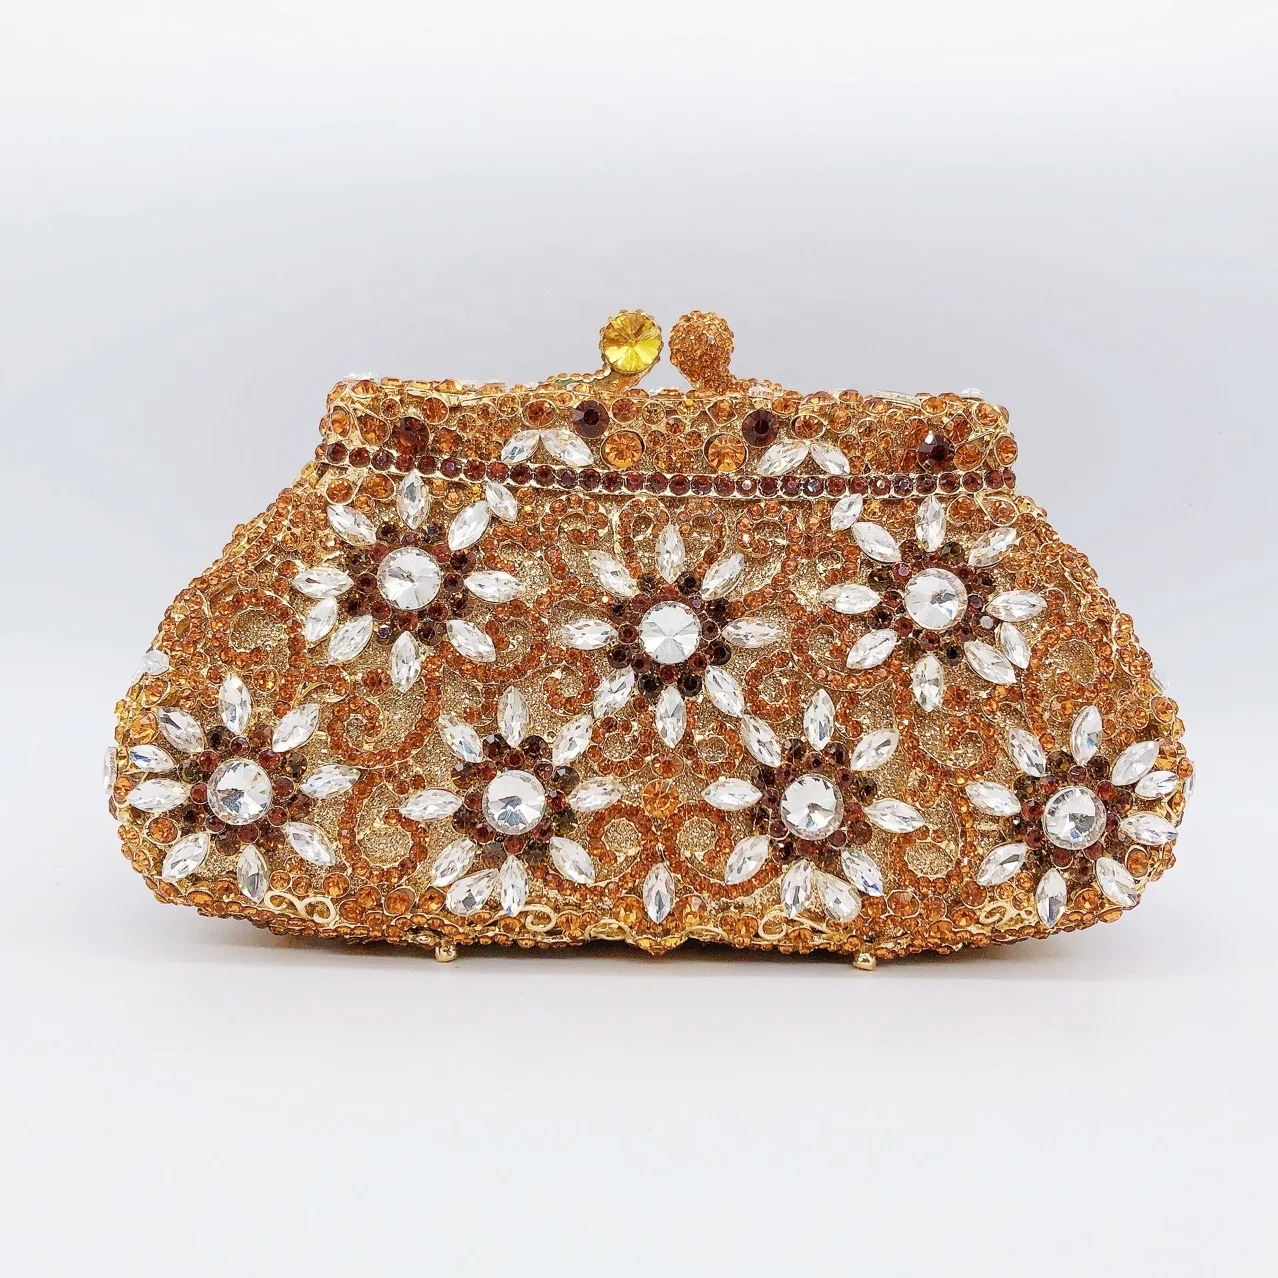 Amiqi MRY74 Beautiful Chain Diamond Rhinestone Evening Clutch Crystal Purse Bling Glitter Gold Bags For Evening Parties